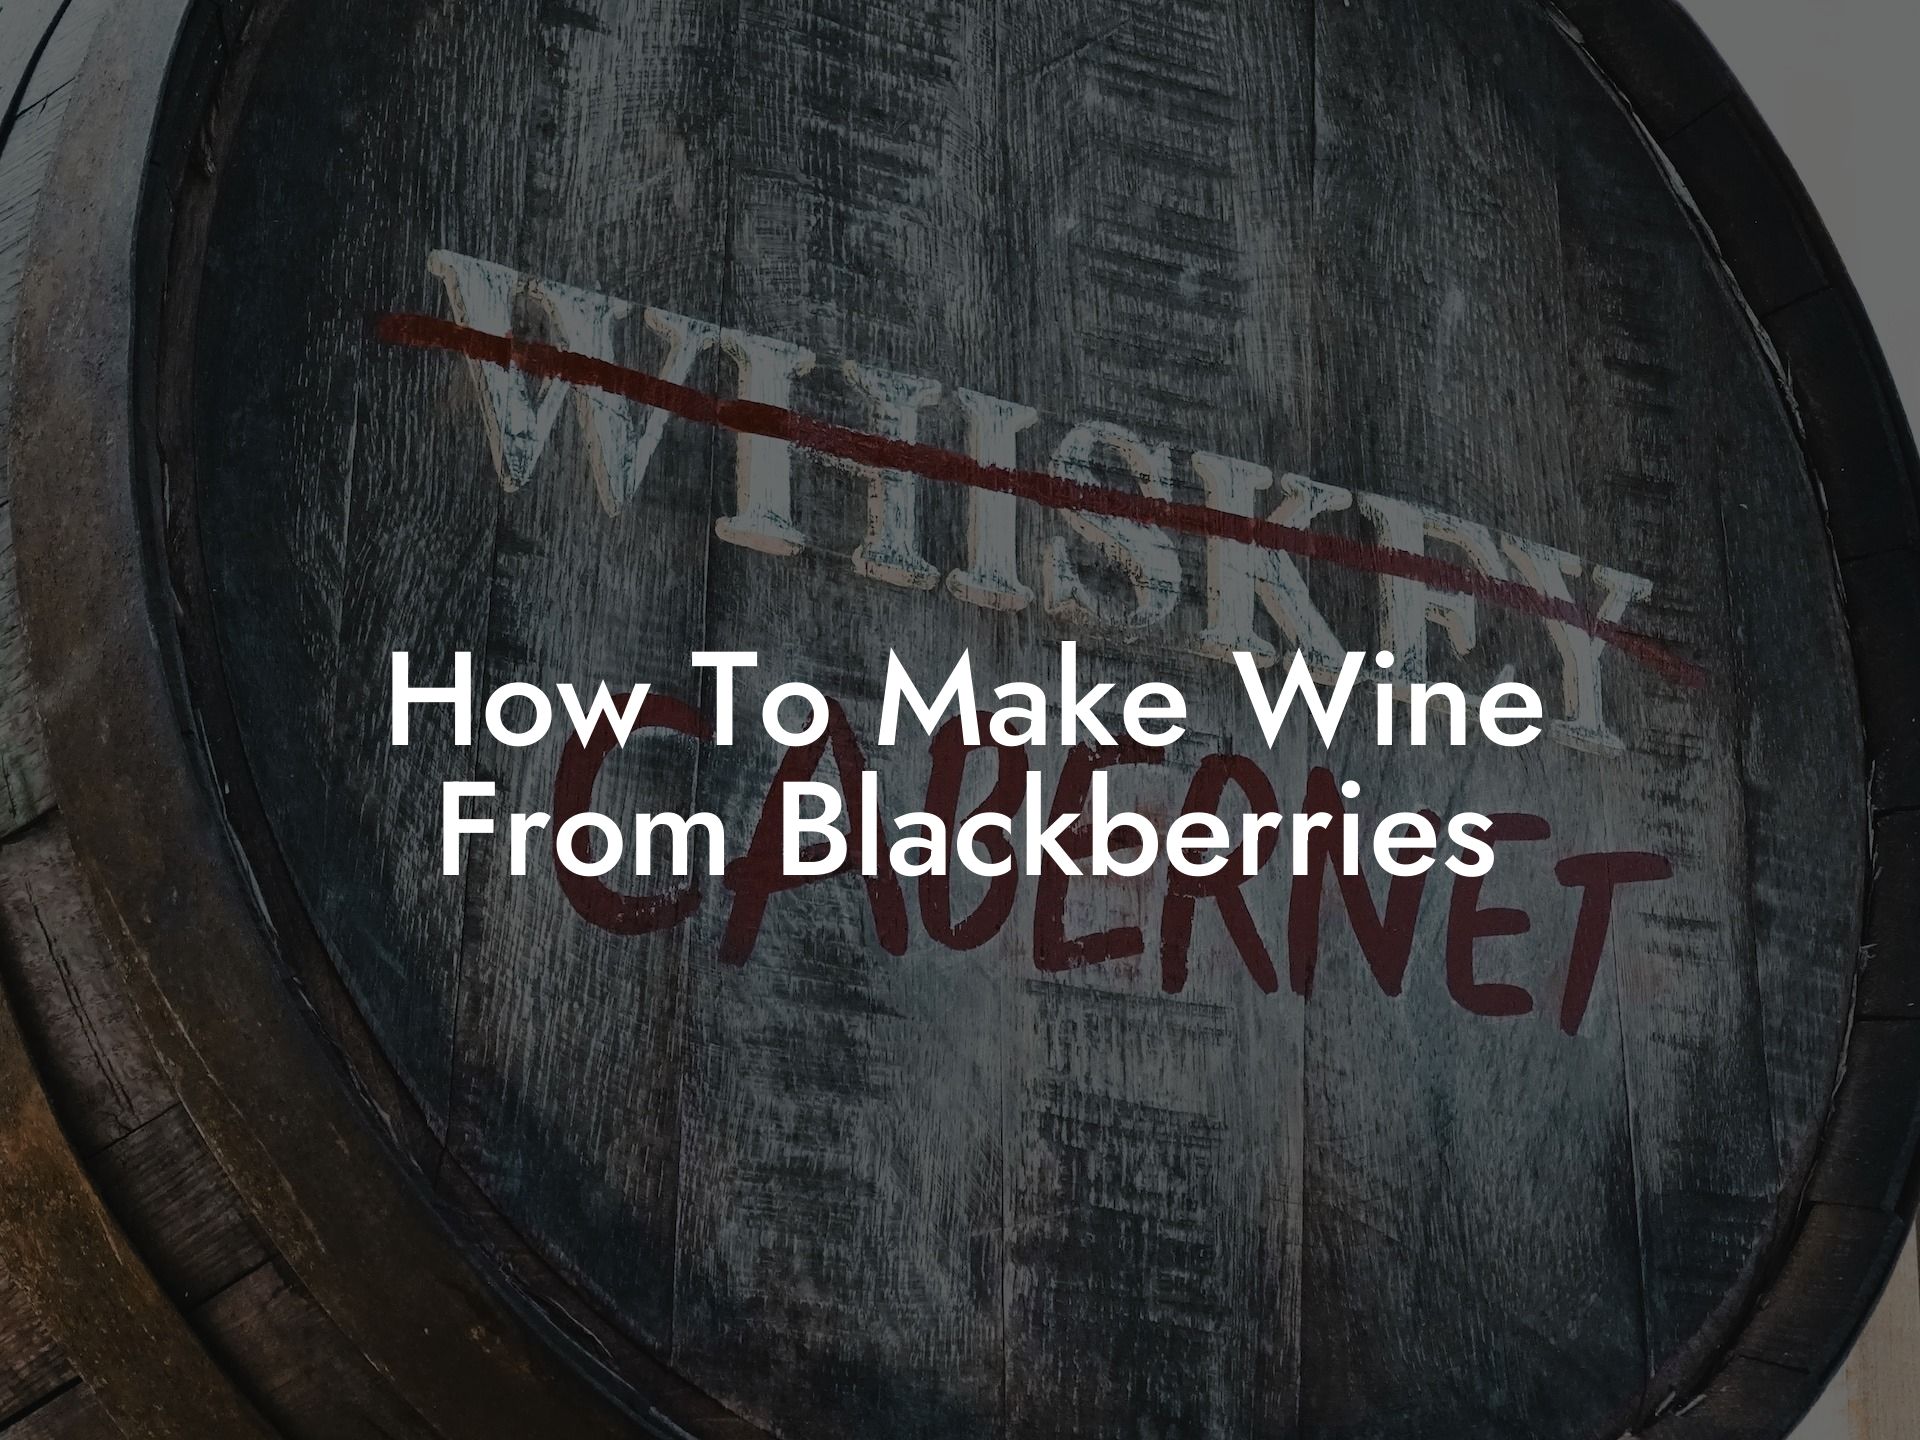 How To Make Wine From Blackberries